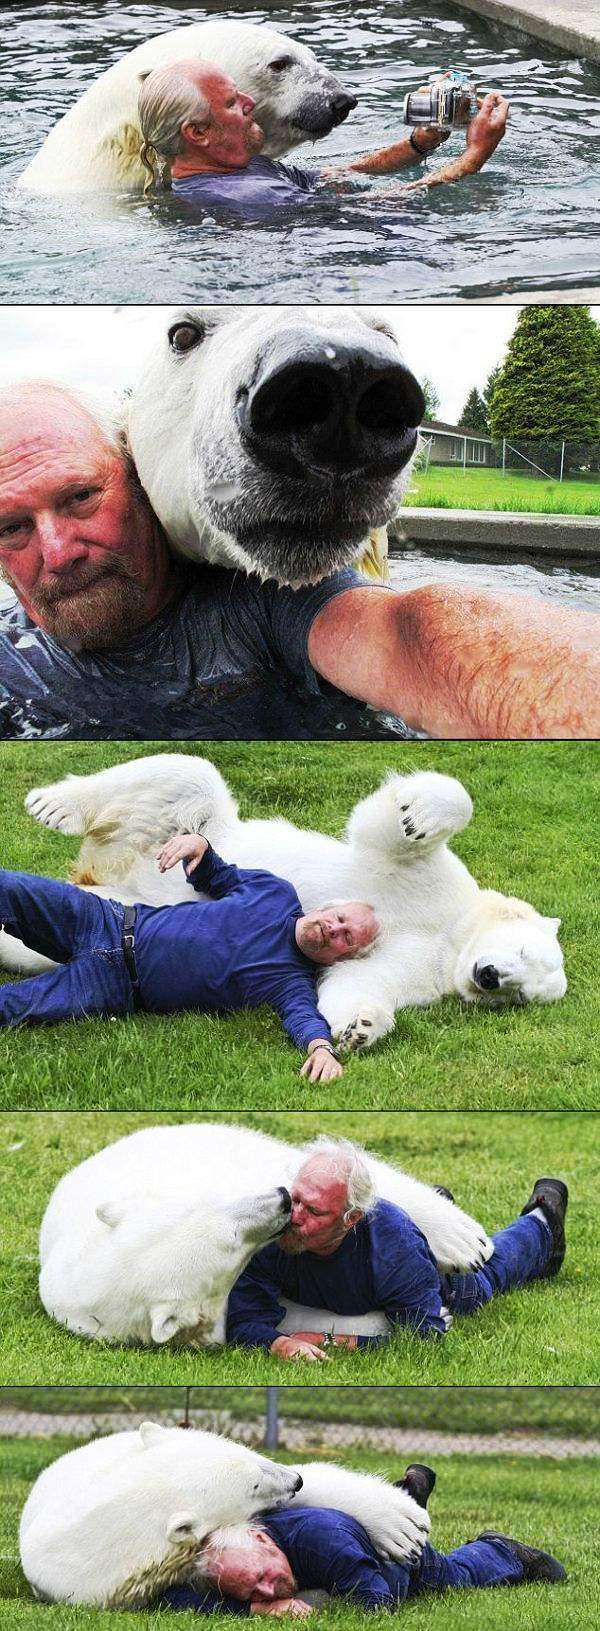 The Benefits Of Being A Polar Bear Zookeeper